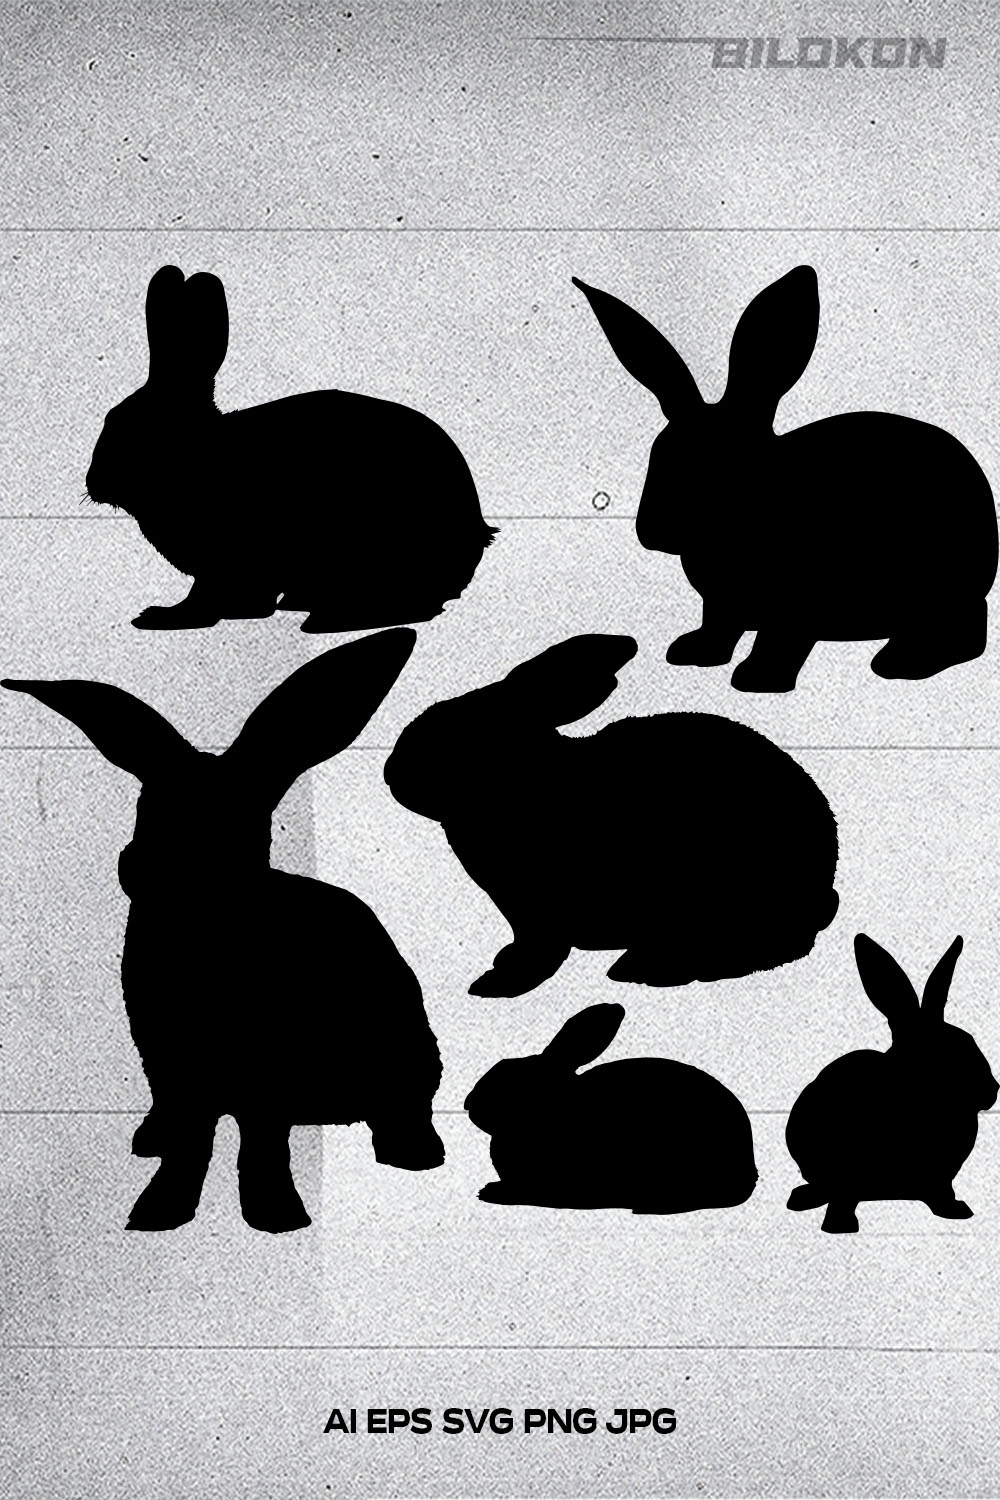 The silhouettes of rabbits are shown in black and white.